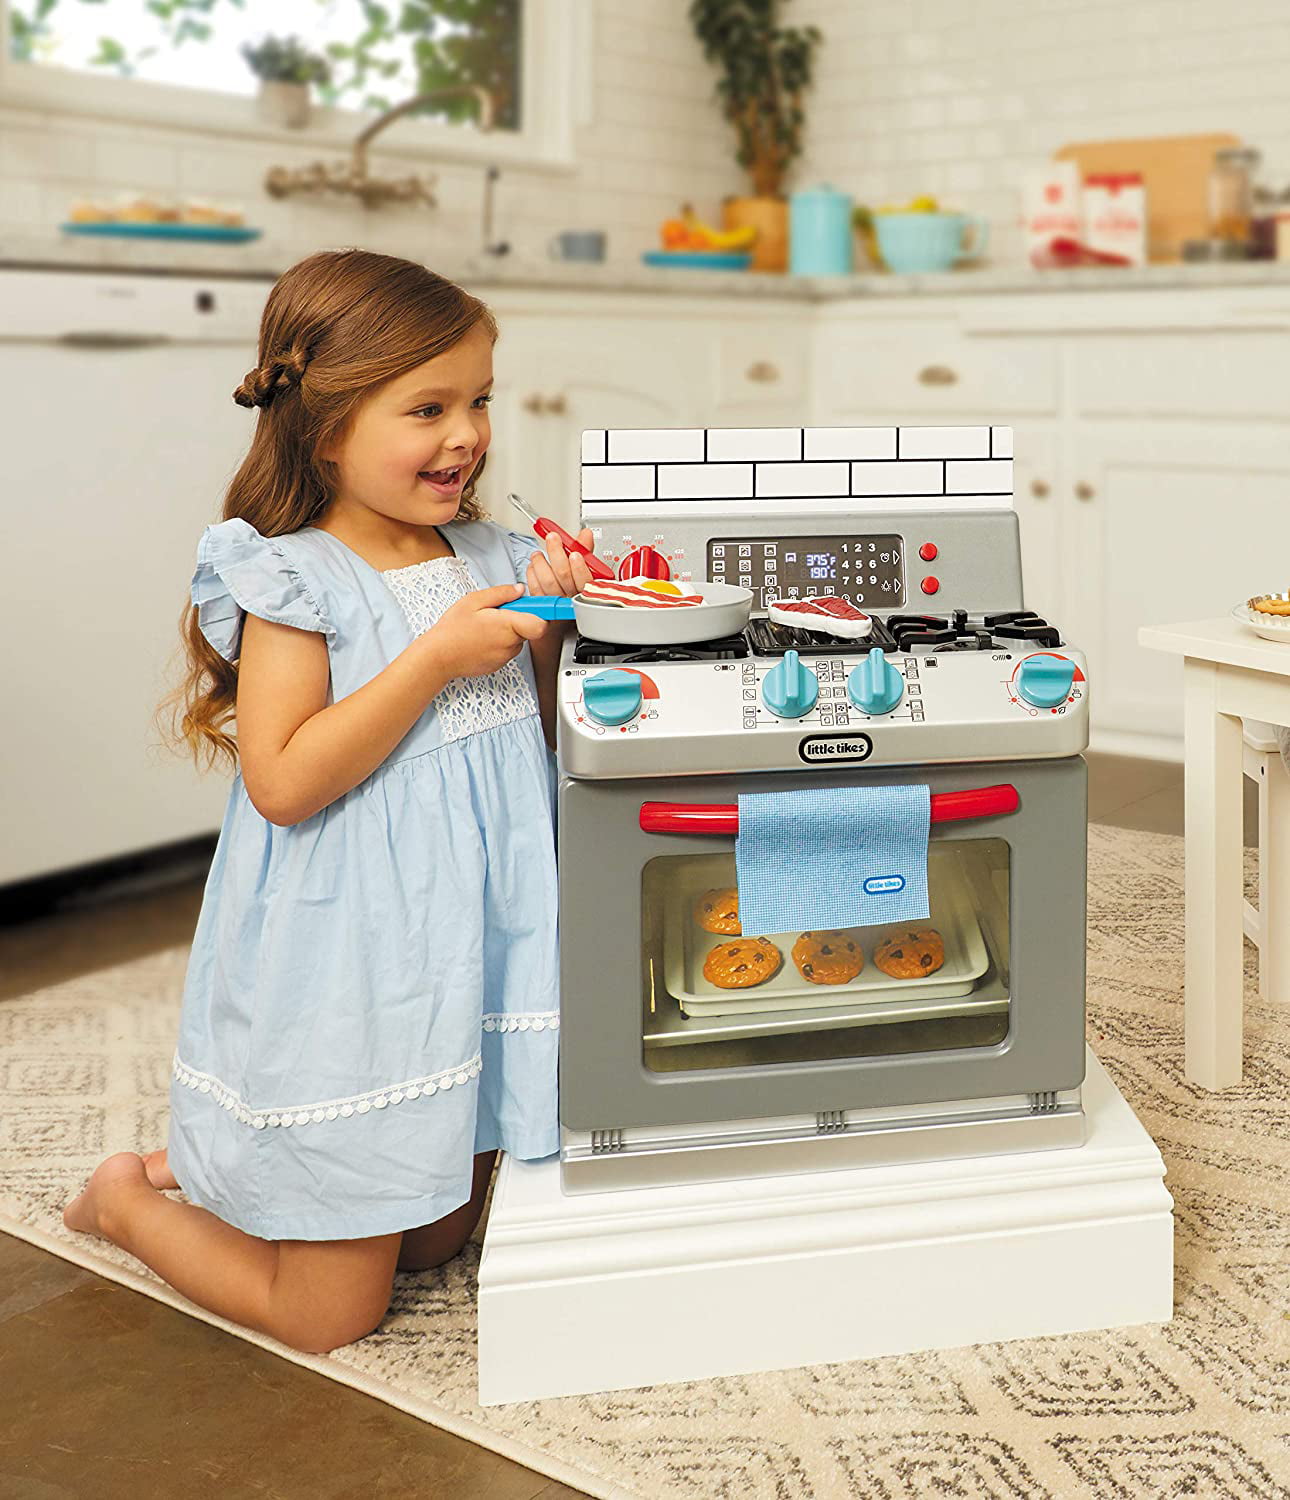 Playgo My Little Oven Toy Oven Multicolor